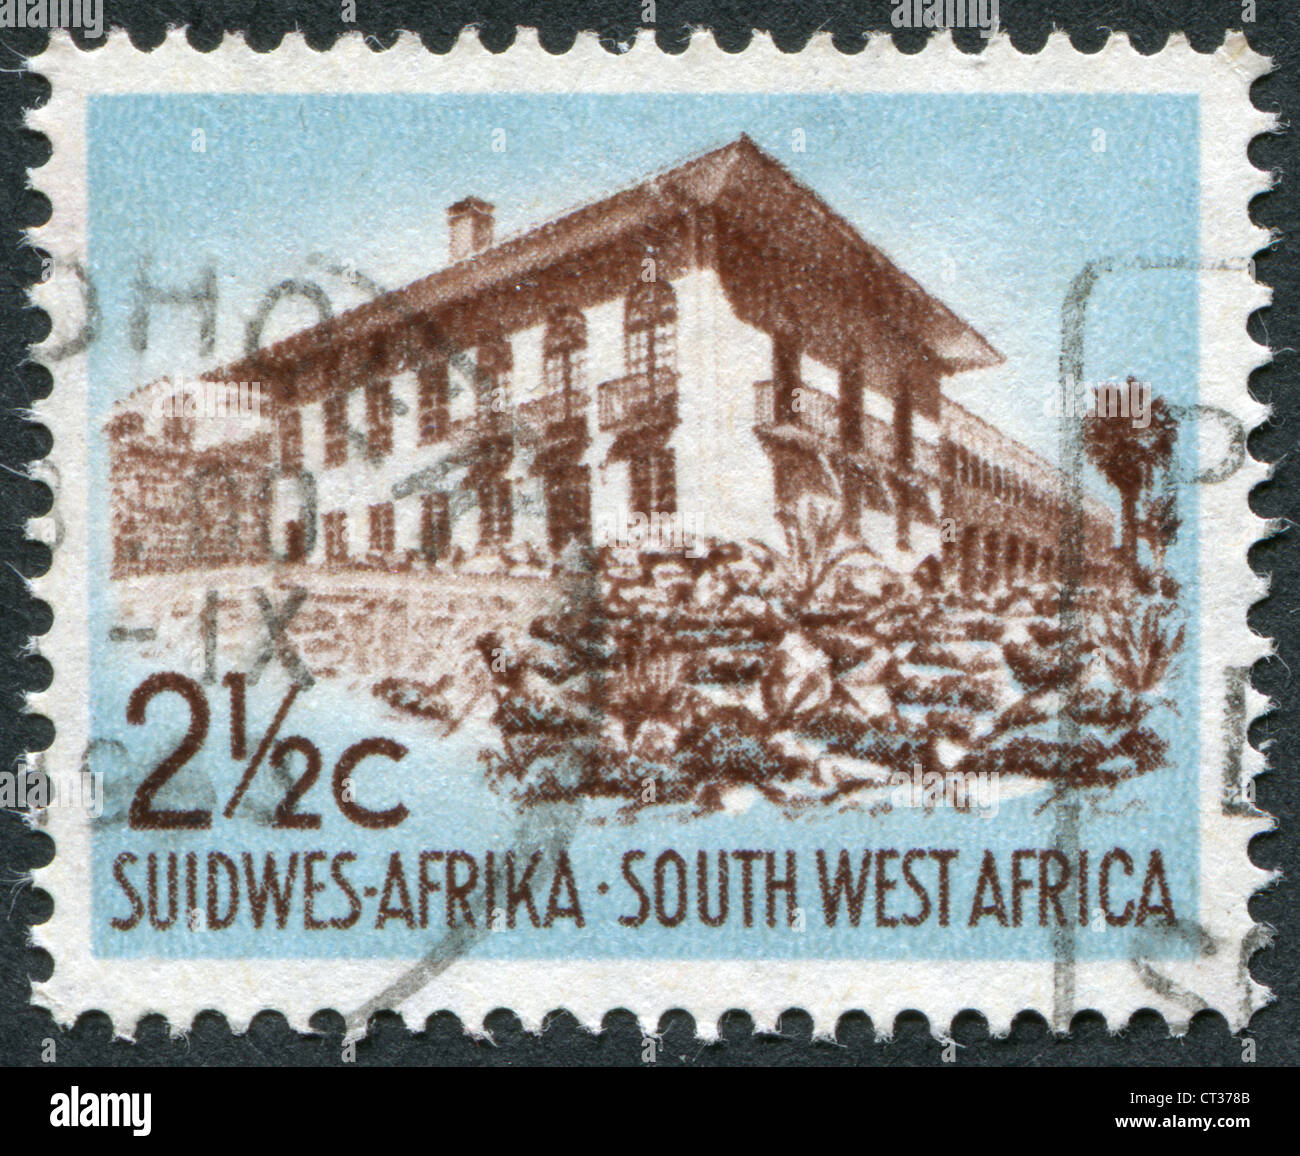 SOUTH WEST AFRICA-CIRCA 1960: A stamp printed in the South West Africa, shows an office building in Windhoek, circa 1960 Stock Photo